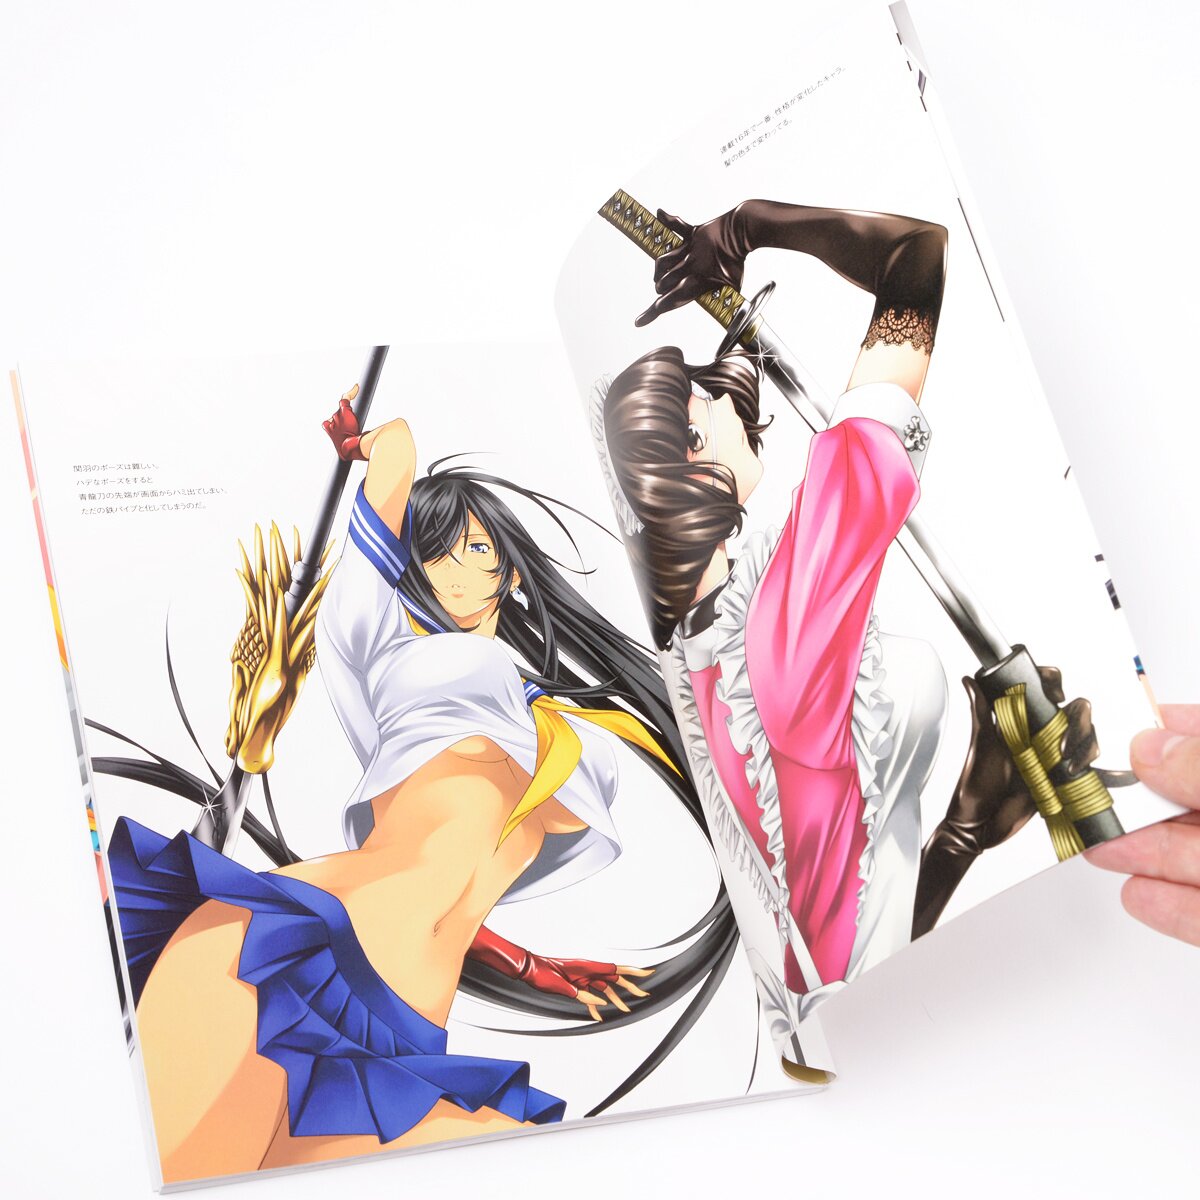 New Shin Ikki Tousen First Limited Edition DVD Booklet Post Card